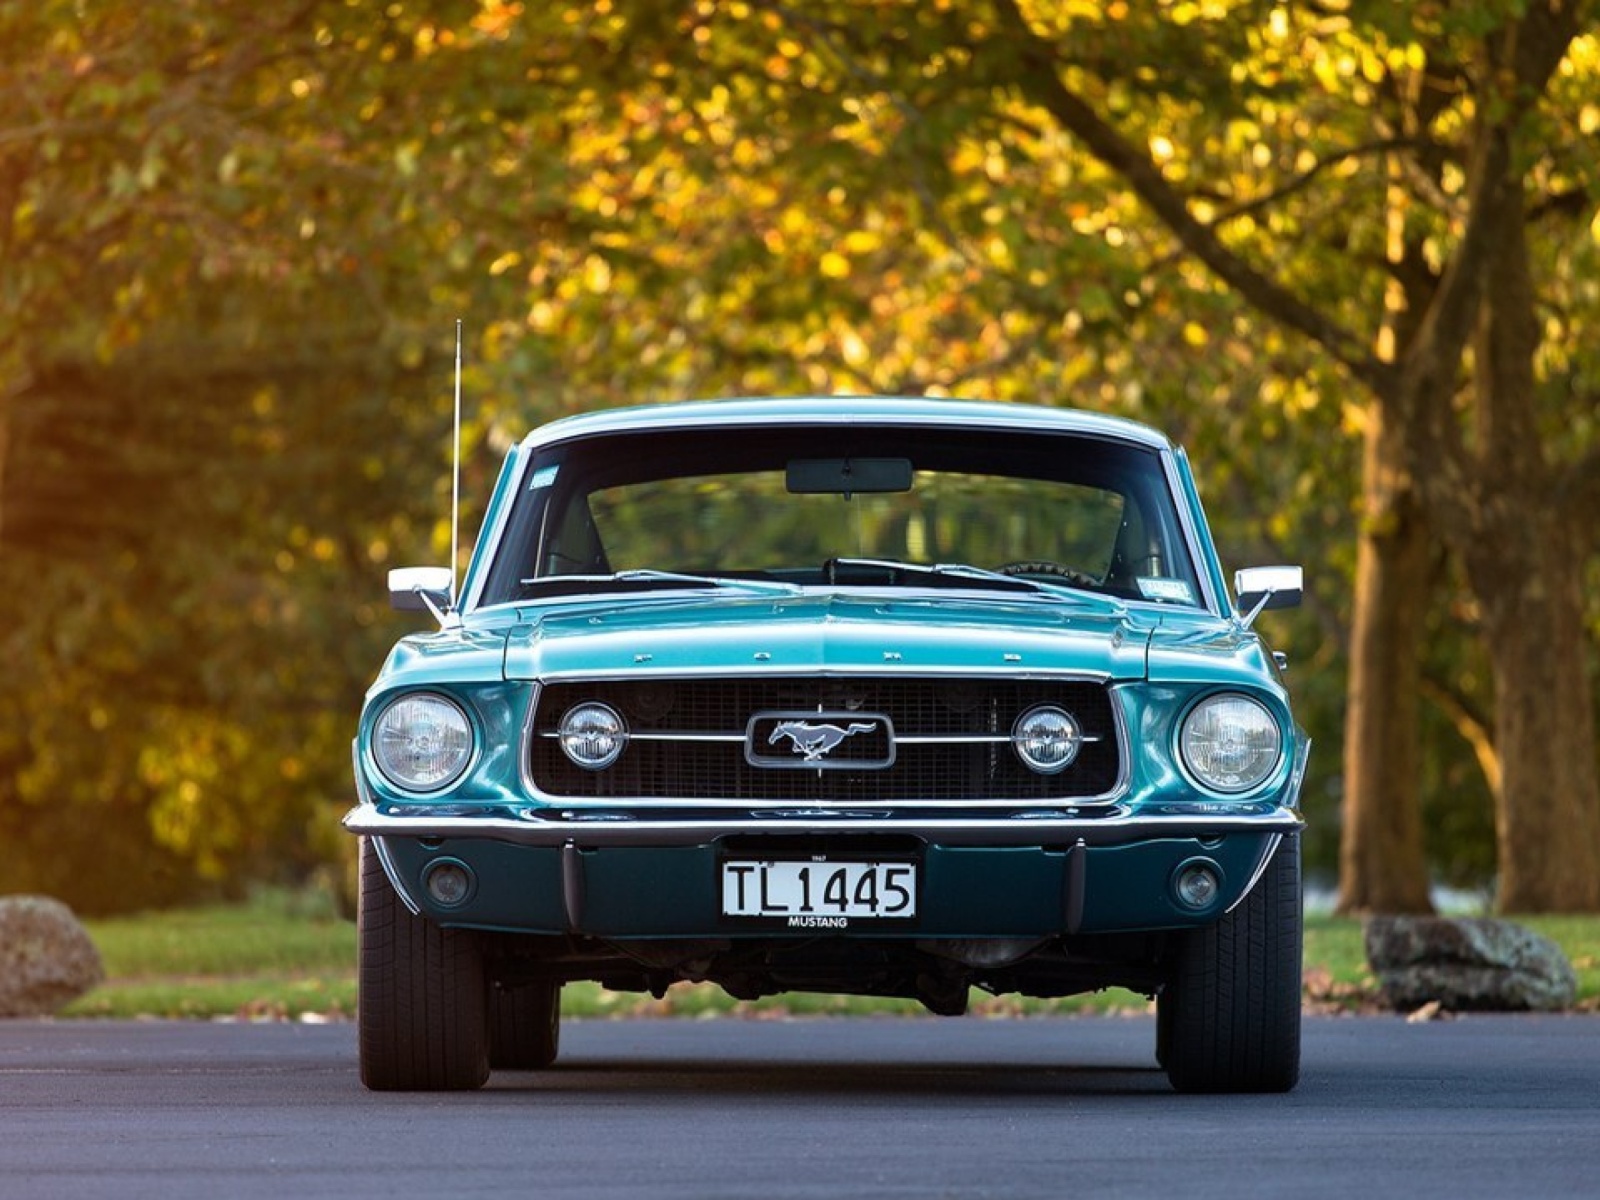 Ford Mustang First Generation wallpaper 1600x1200